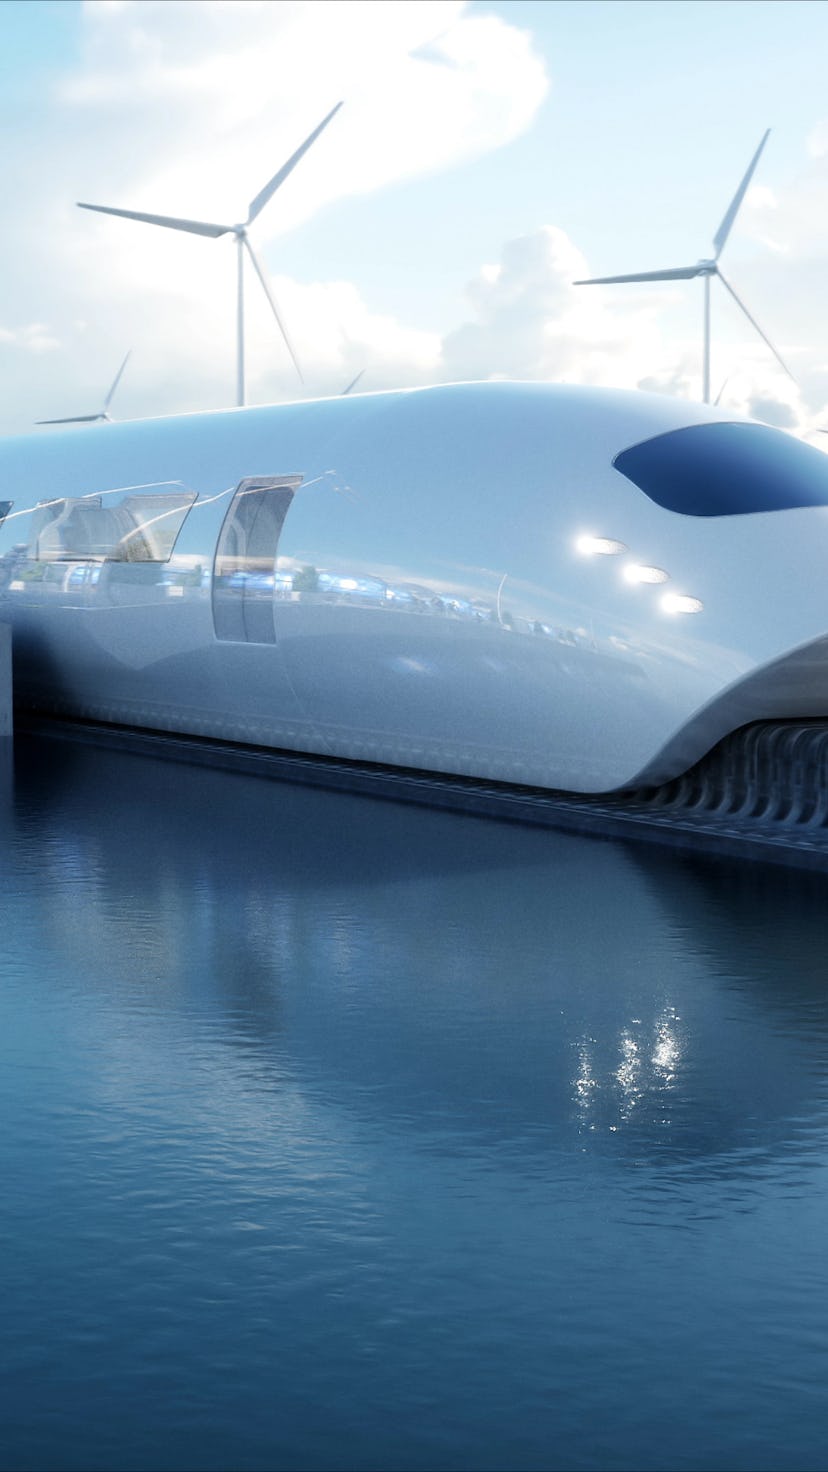 speedly Futuristic monorail train. Sci fi station. Concept of future. People and robots. Water and w...